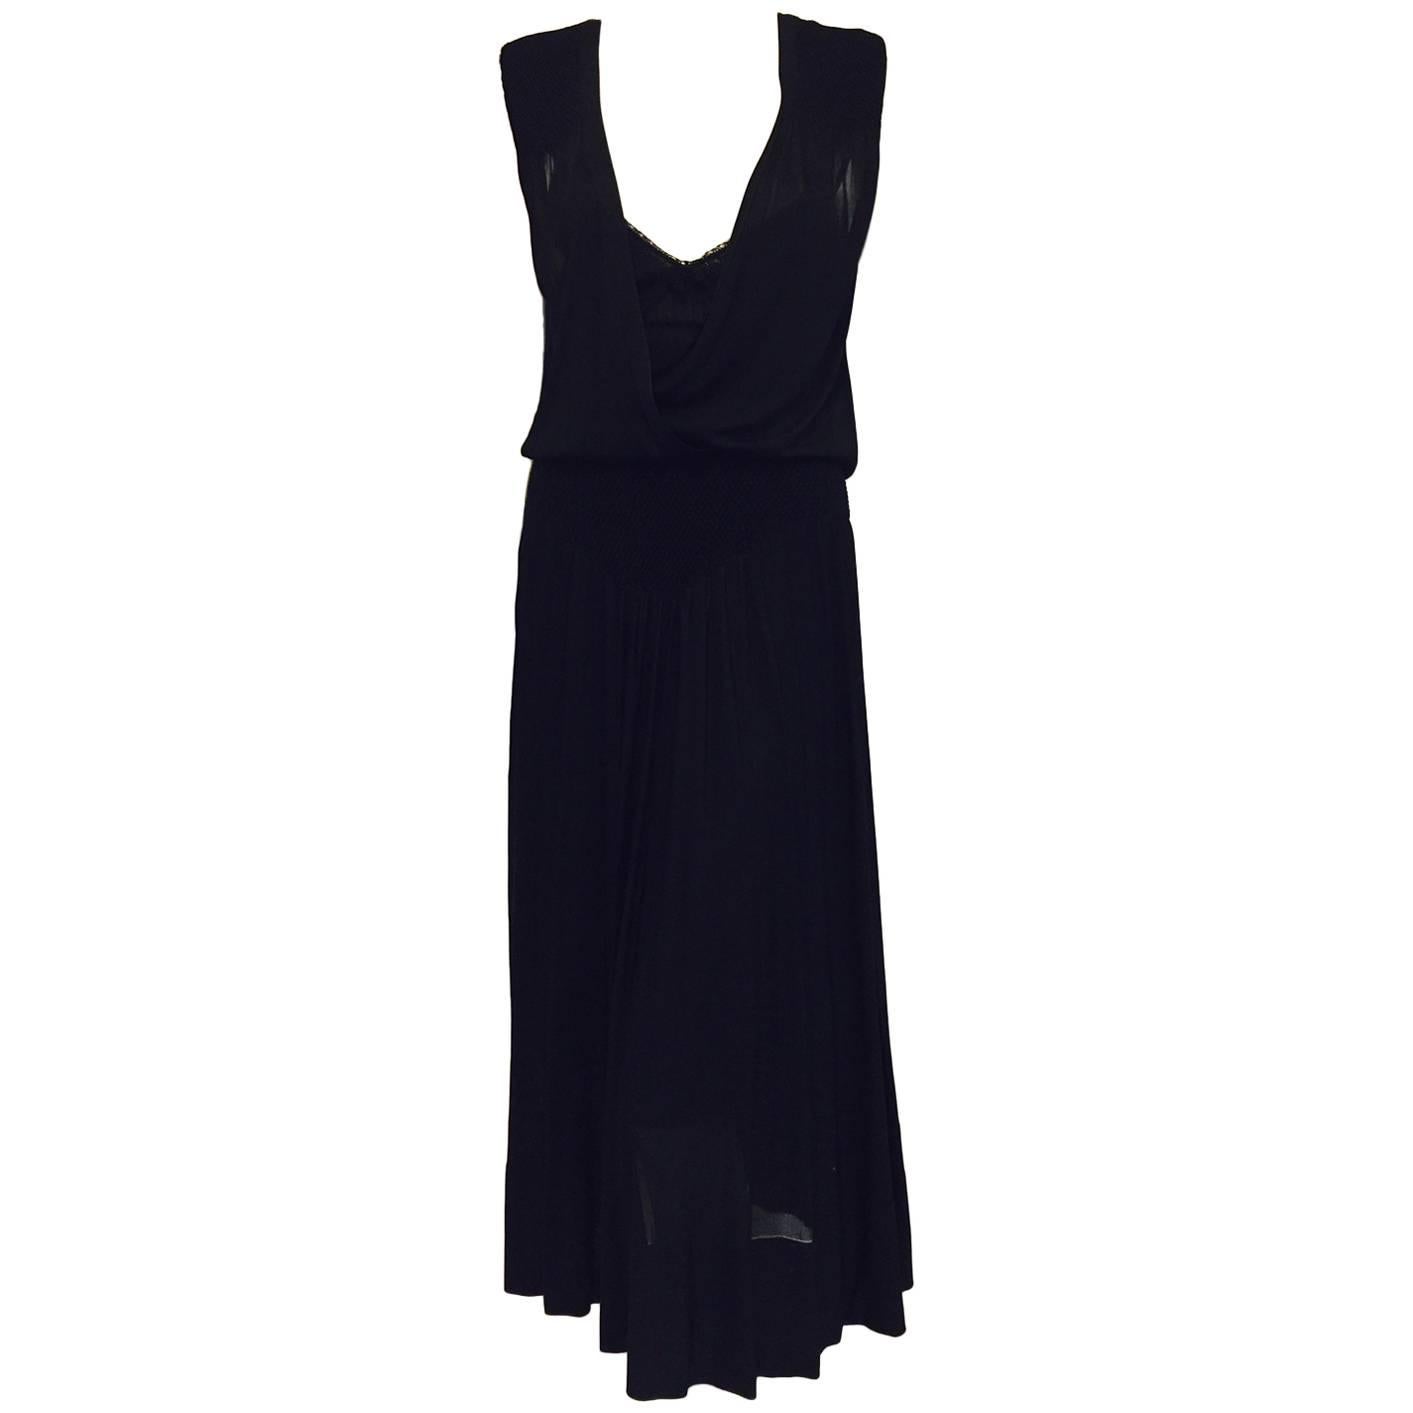 Chanel Black Viscose Stretch Dress With Surplice Front and Full Longer Skirt 